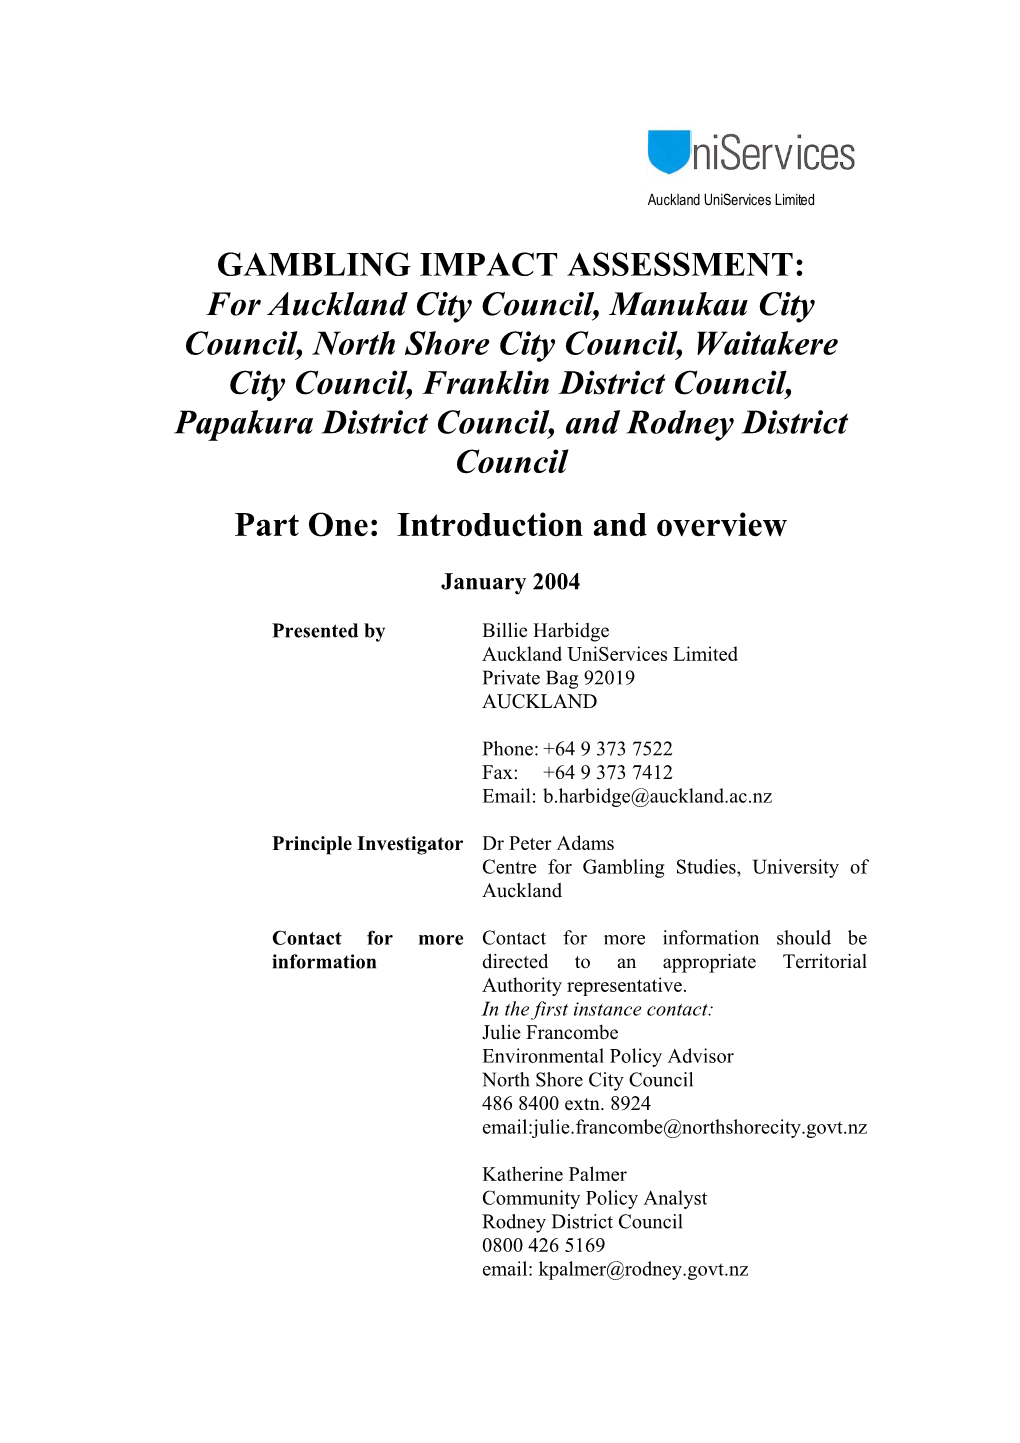 GAMBLING IMPACT ASSESSMENT: for Auckland City Council